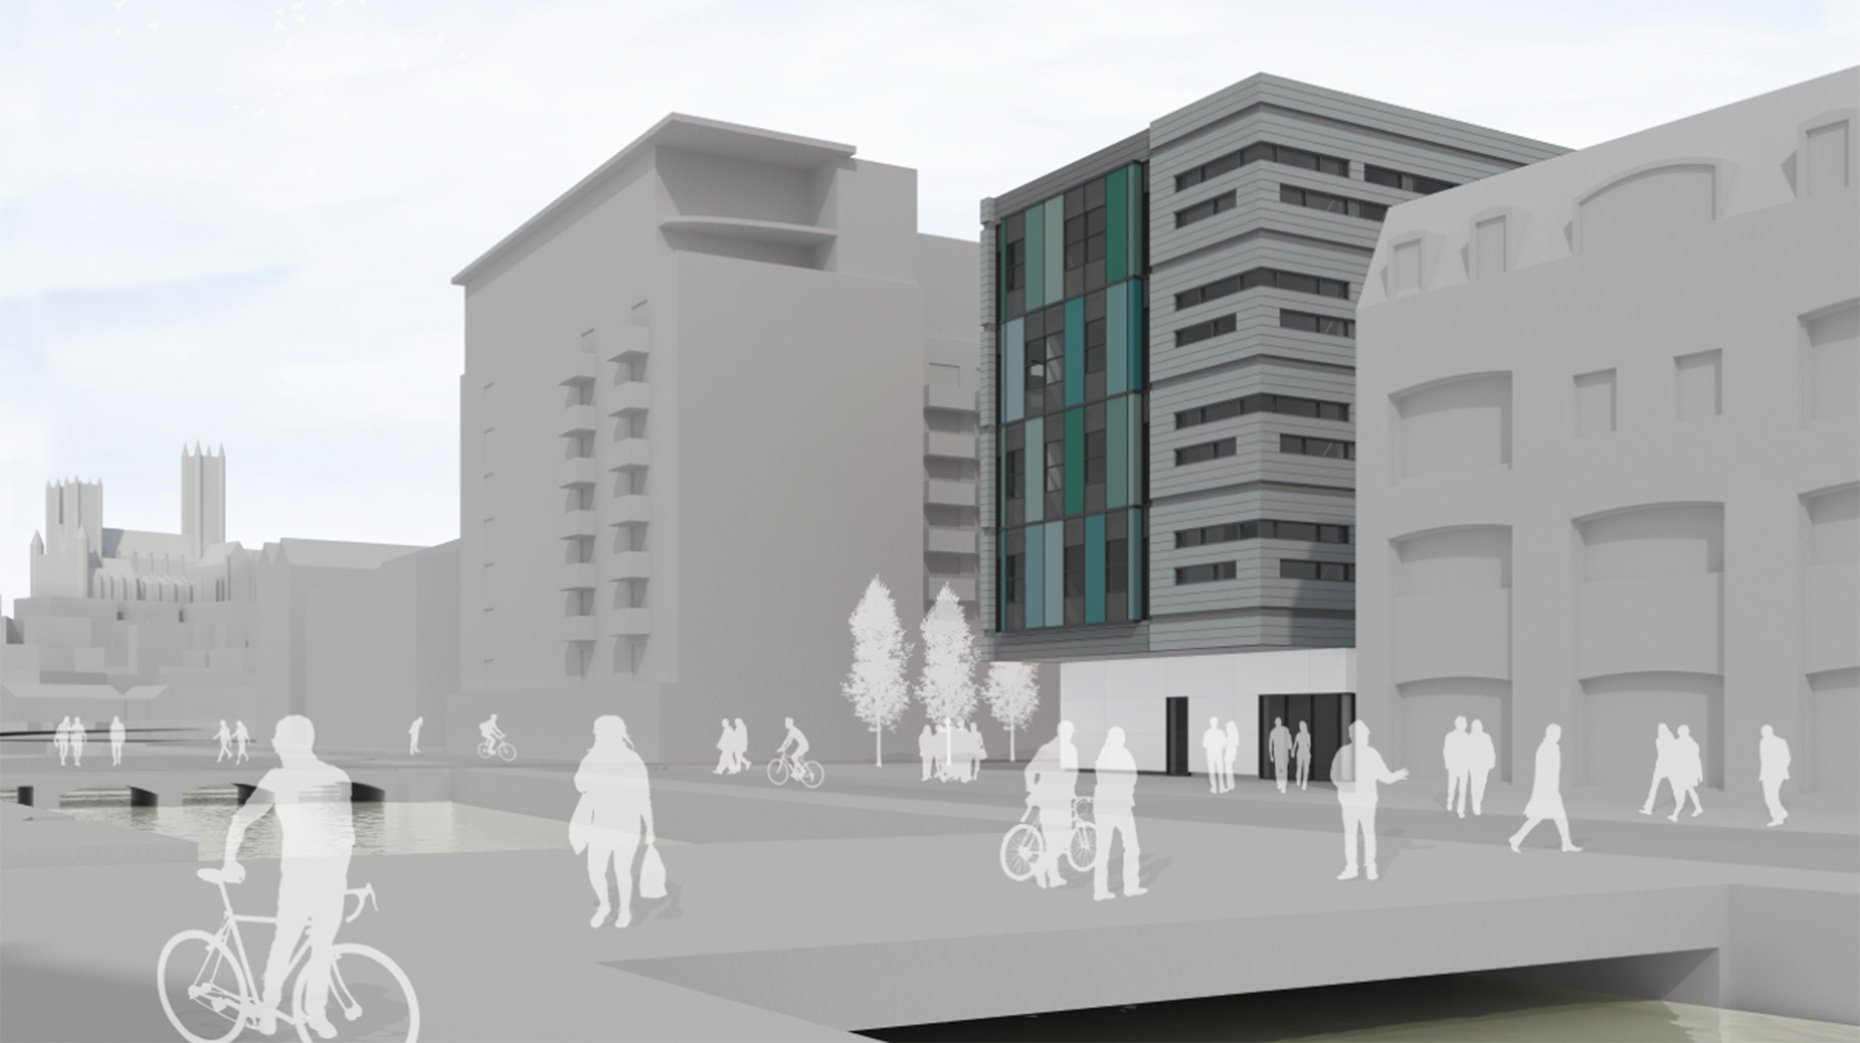 The building sits south of the Brayford Level crossing. Artist's impression: Faulkner Browns Architects